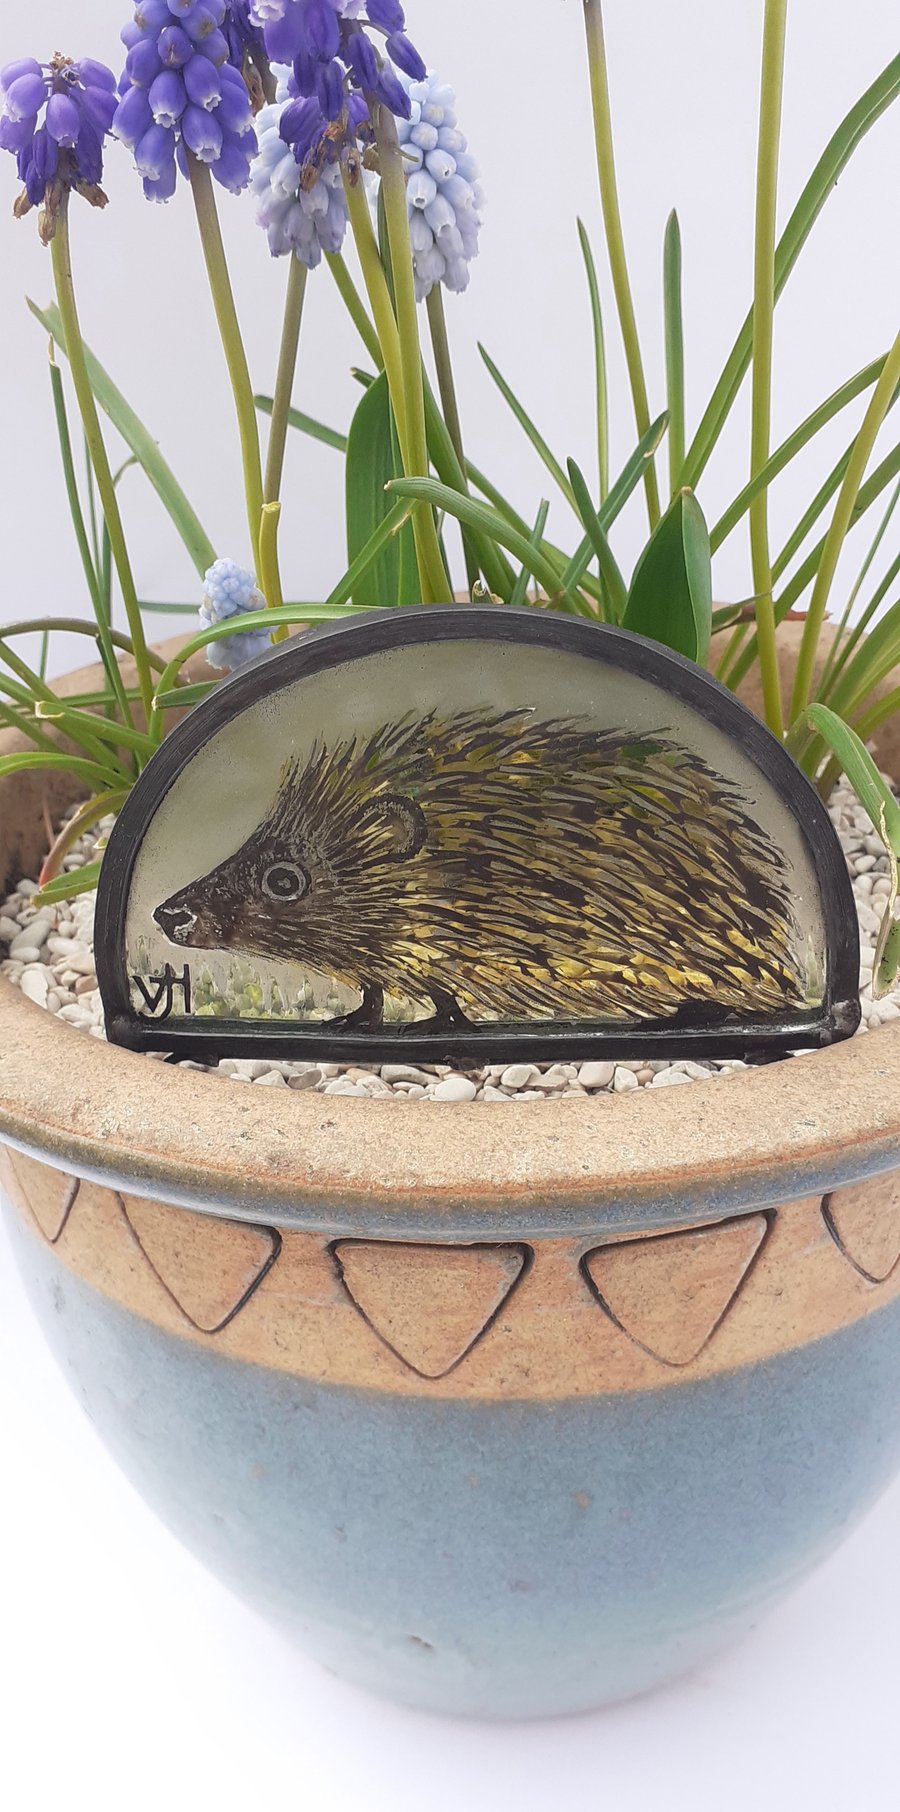 Stained Glass hedgehog plant pot ornament